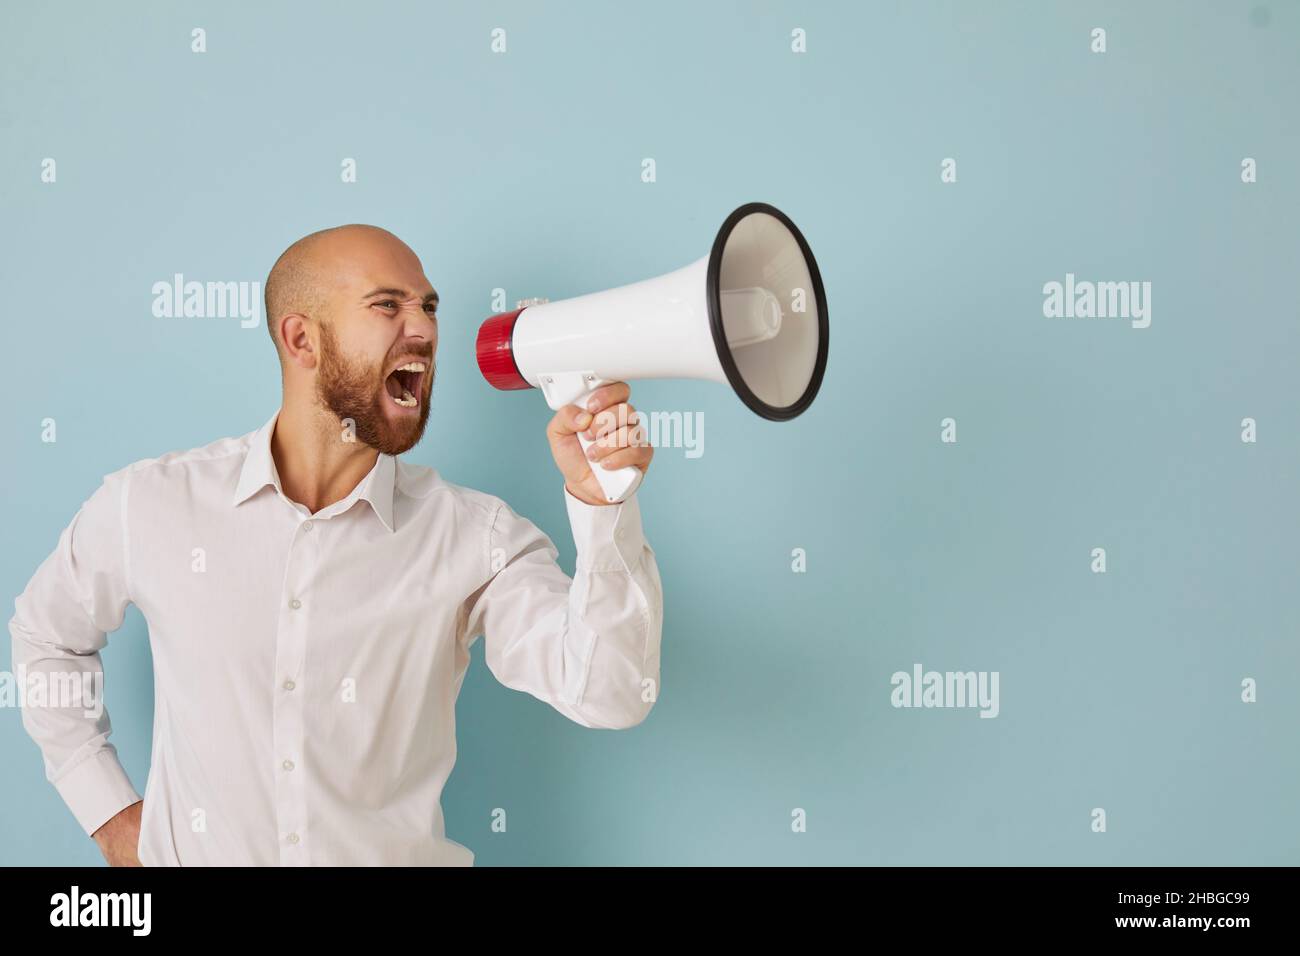 Dissatisfied and angry businessman resolutely makes loud announcement shouting into loudspeaker. Stock Photo